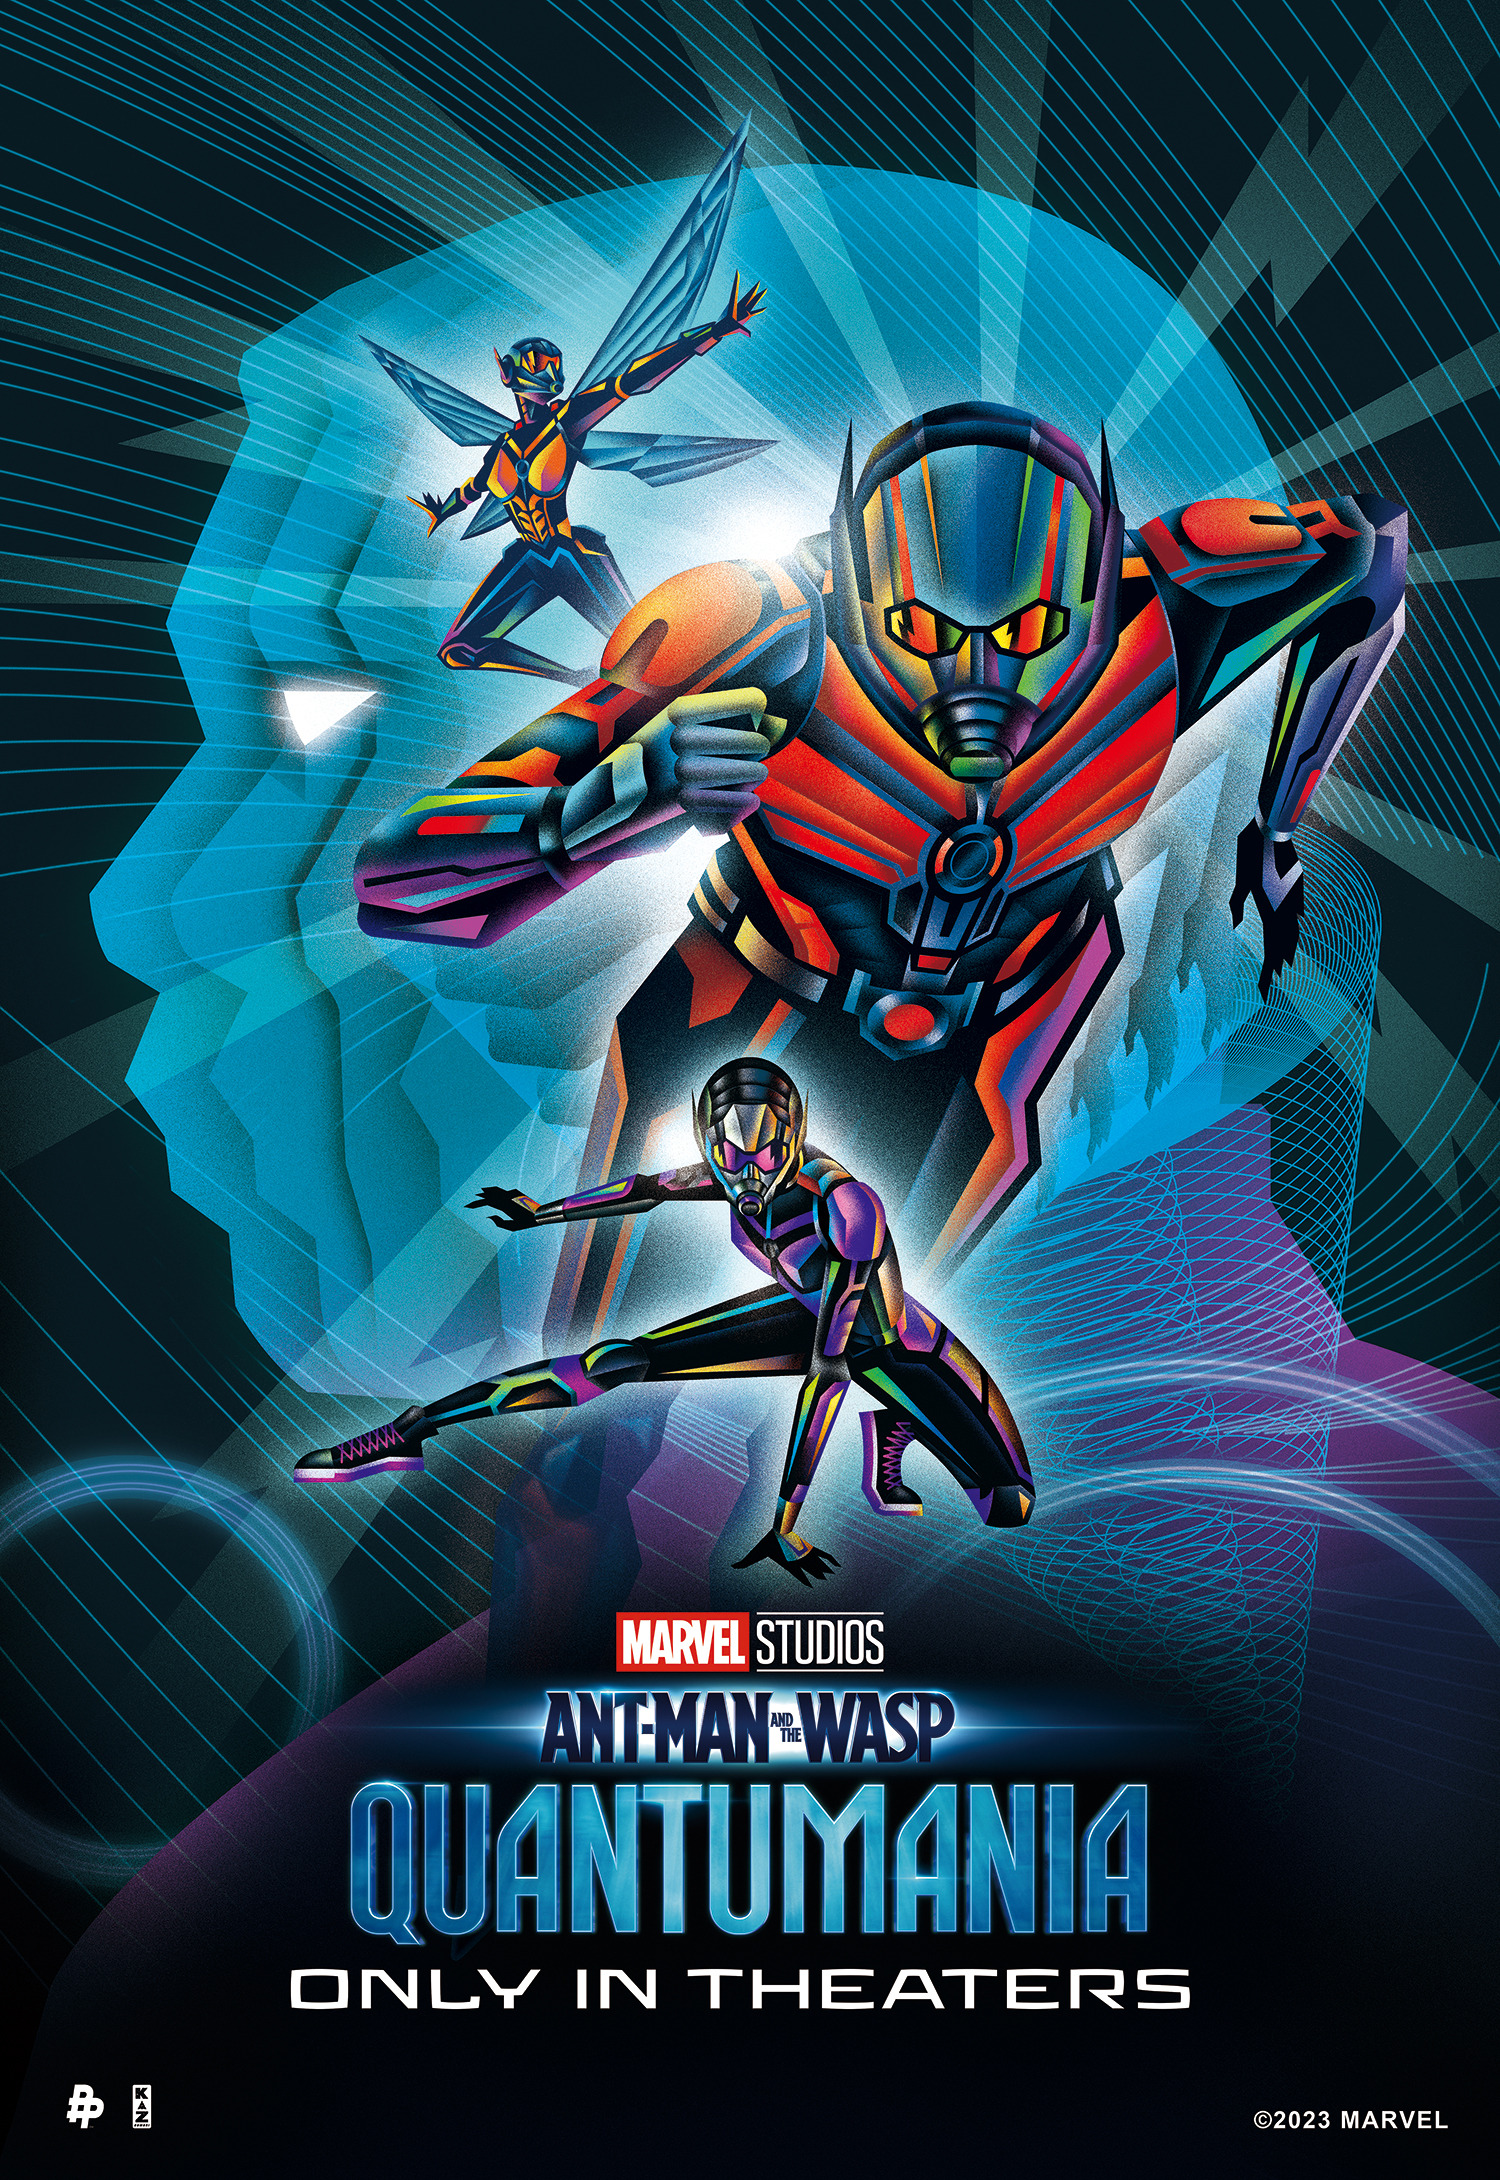 Mega Sized Movie Poster Image for Ant-Man and the Wasp: Quantumania (#27 of 27)